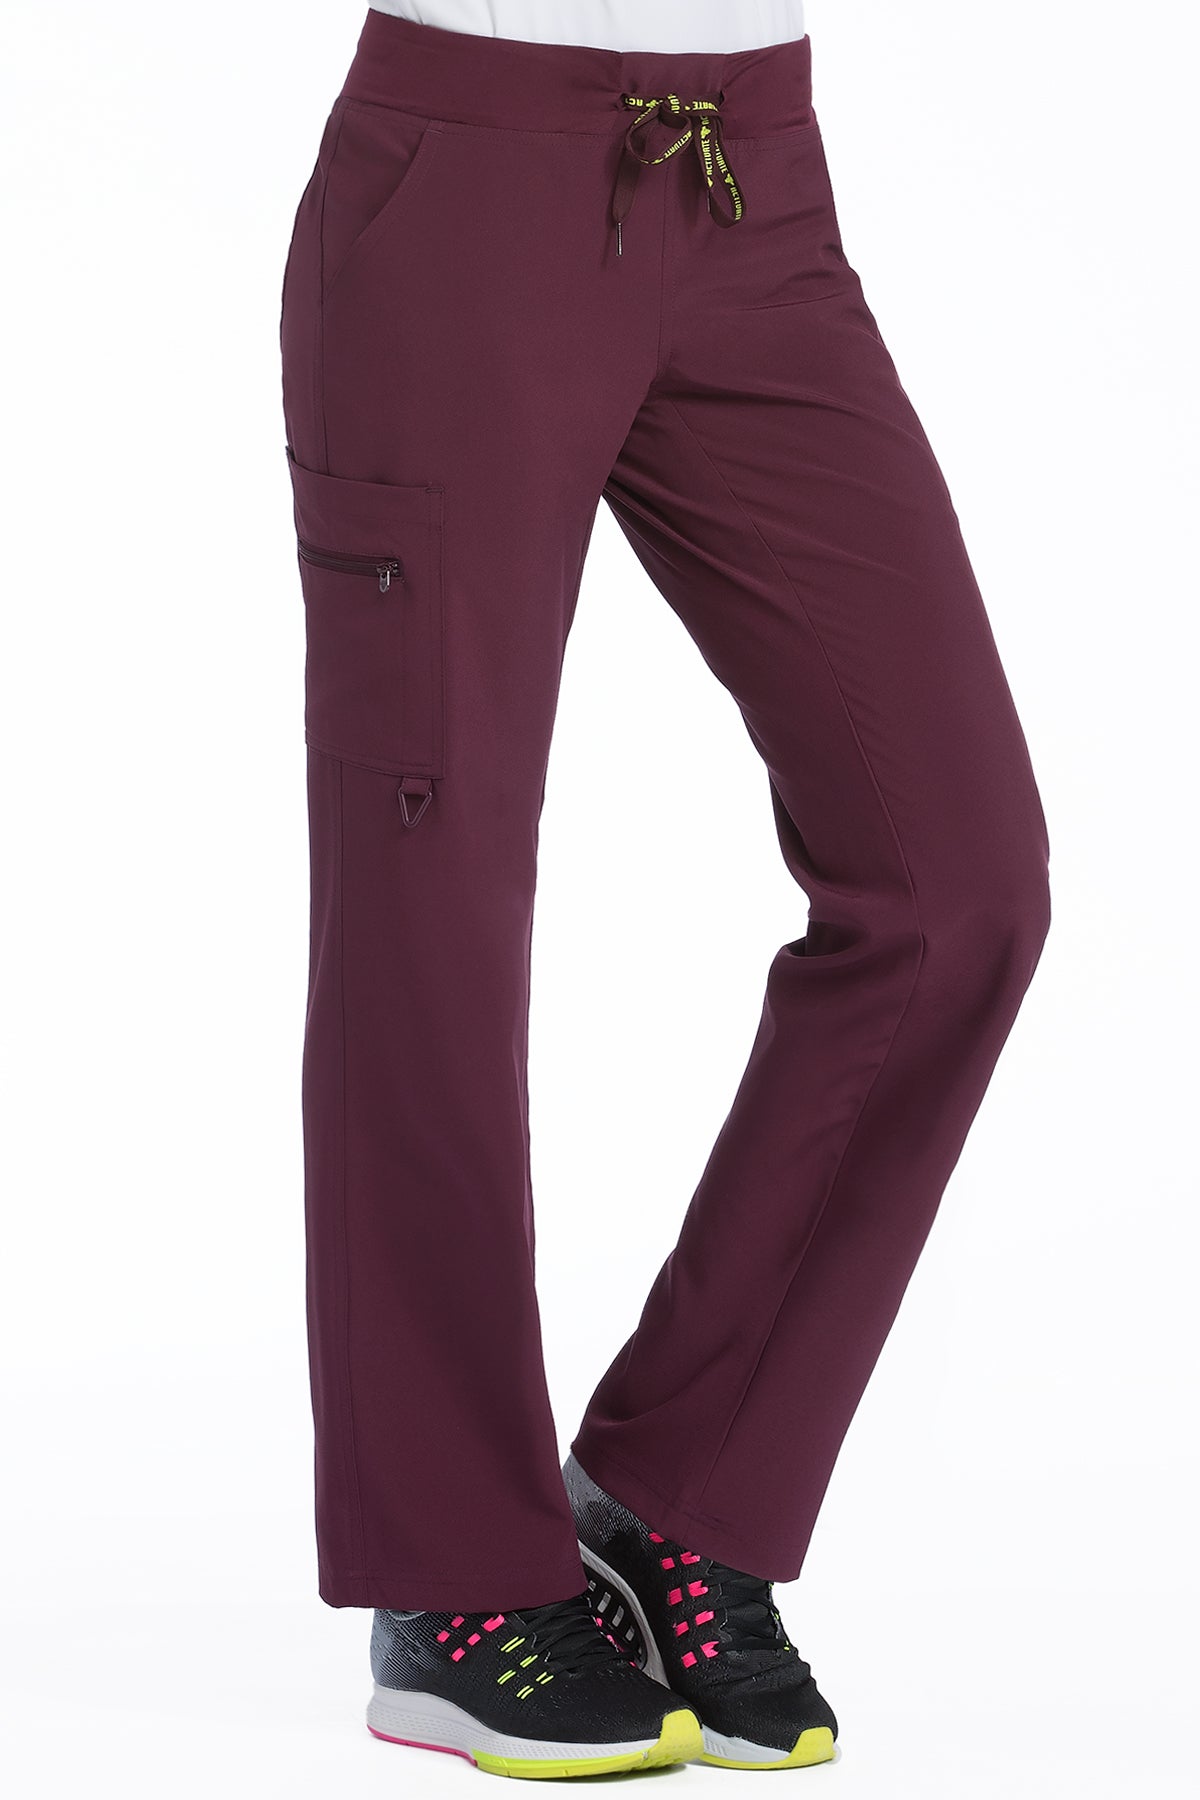 Yoga 1 Cargo Pocket Pants by Med Couture (Regular)  (XXS-3XL) / Wine